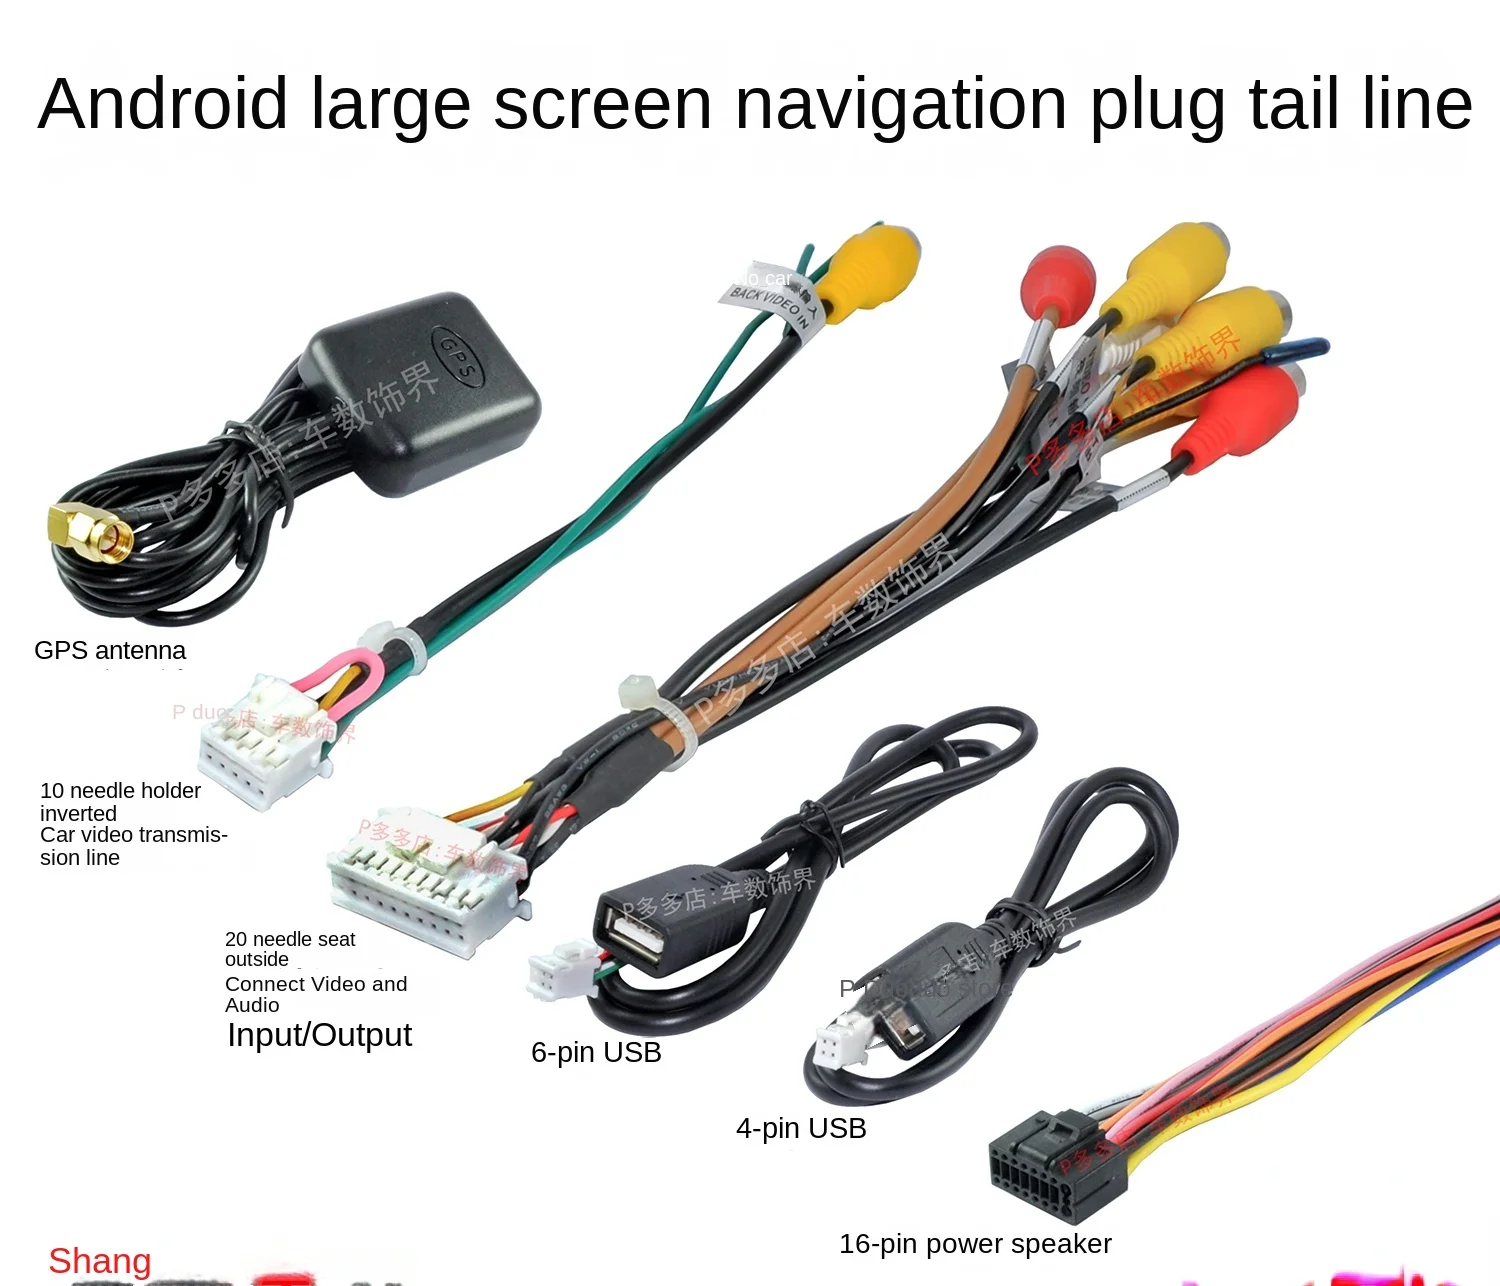 

1Pc for Android large screen navigation 20P audio output reverse video AUX input RCA plug rear view USB tail cable